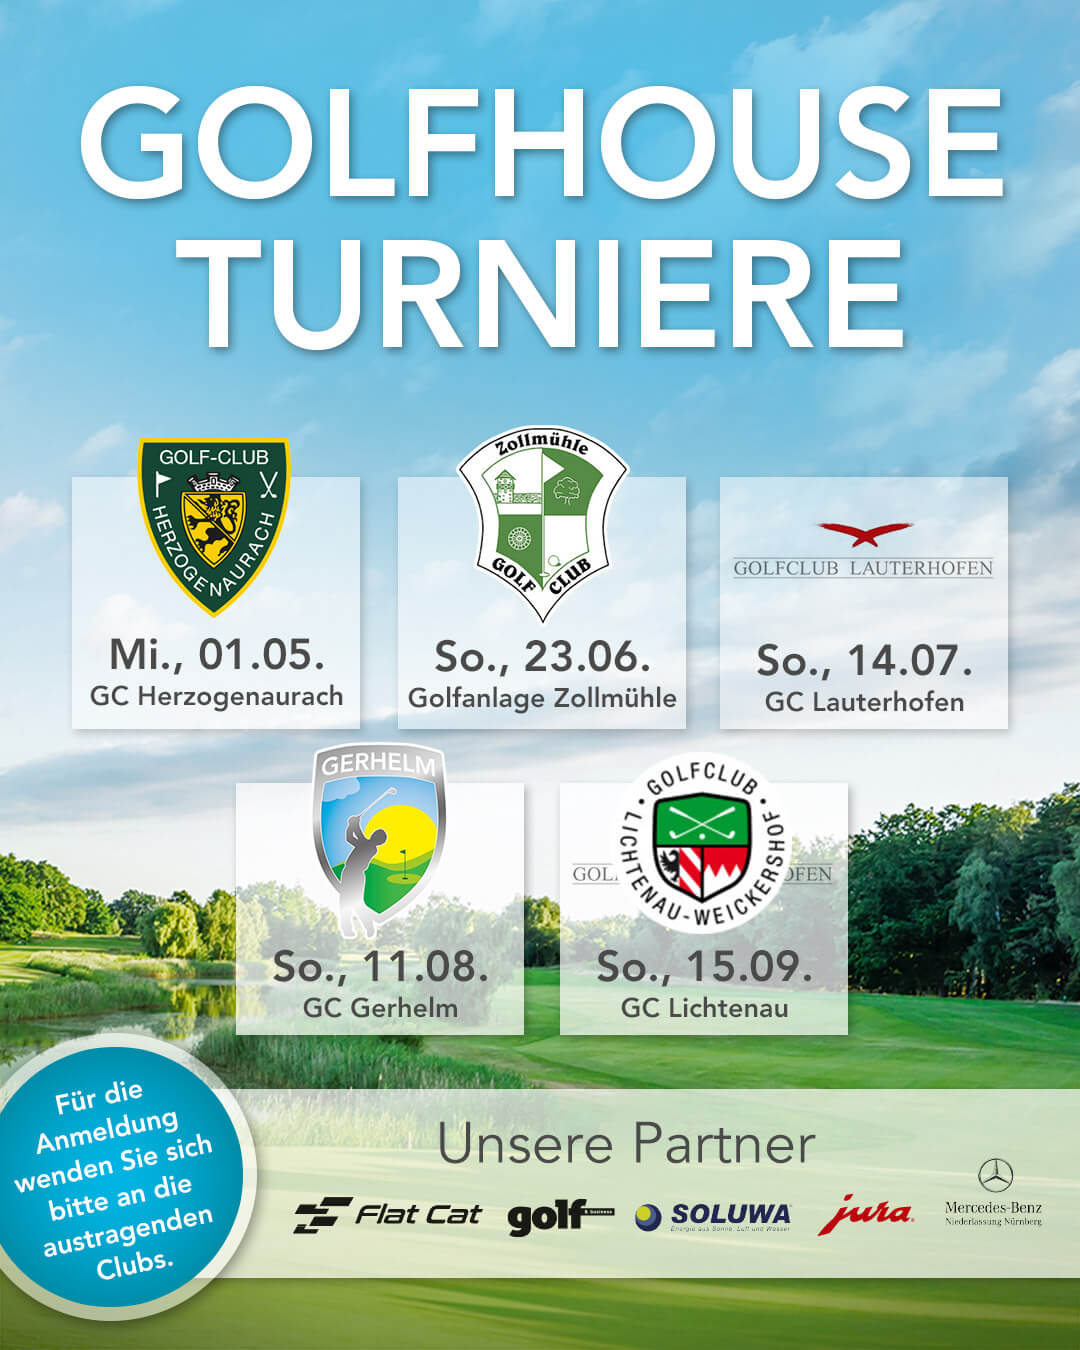 Golfhouse Turniere